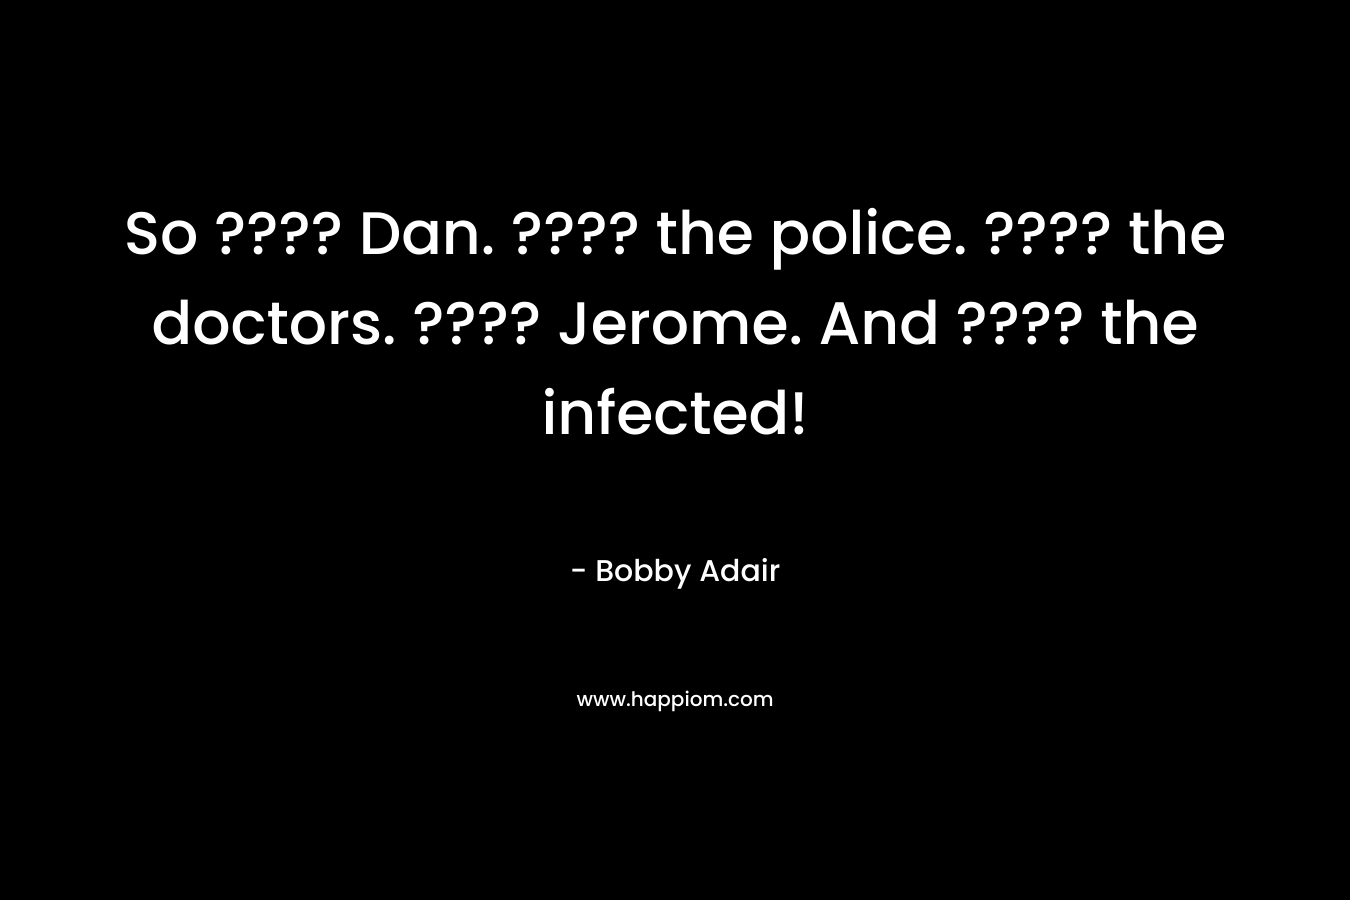 So ???? Dan. ???? the police. ???? the doctors. ???? Jerome. And ???? the infected!